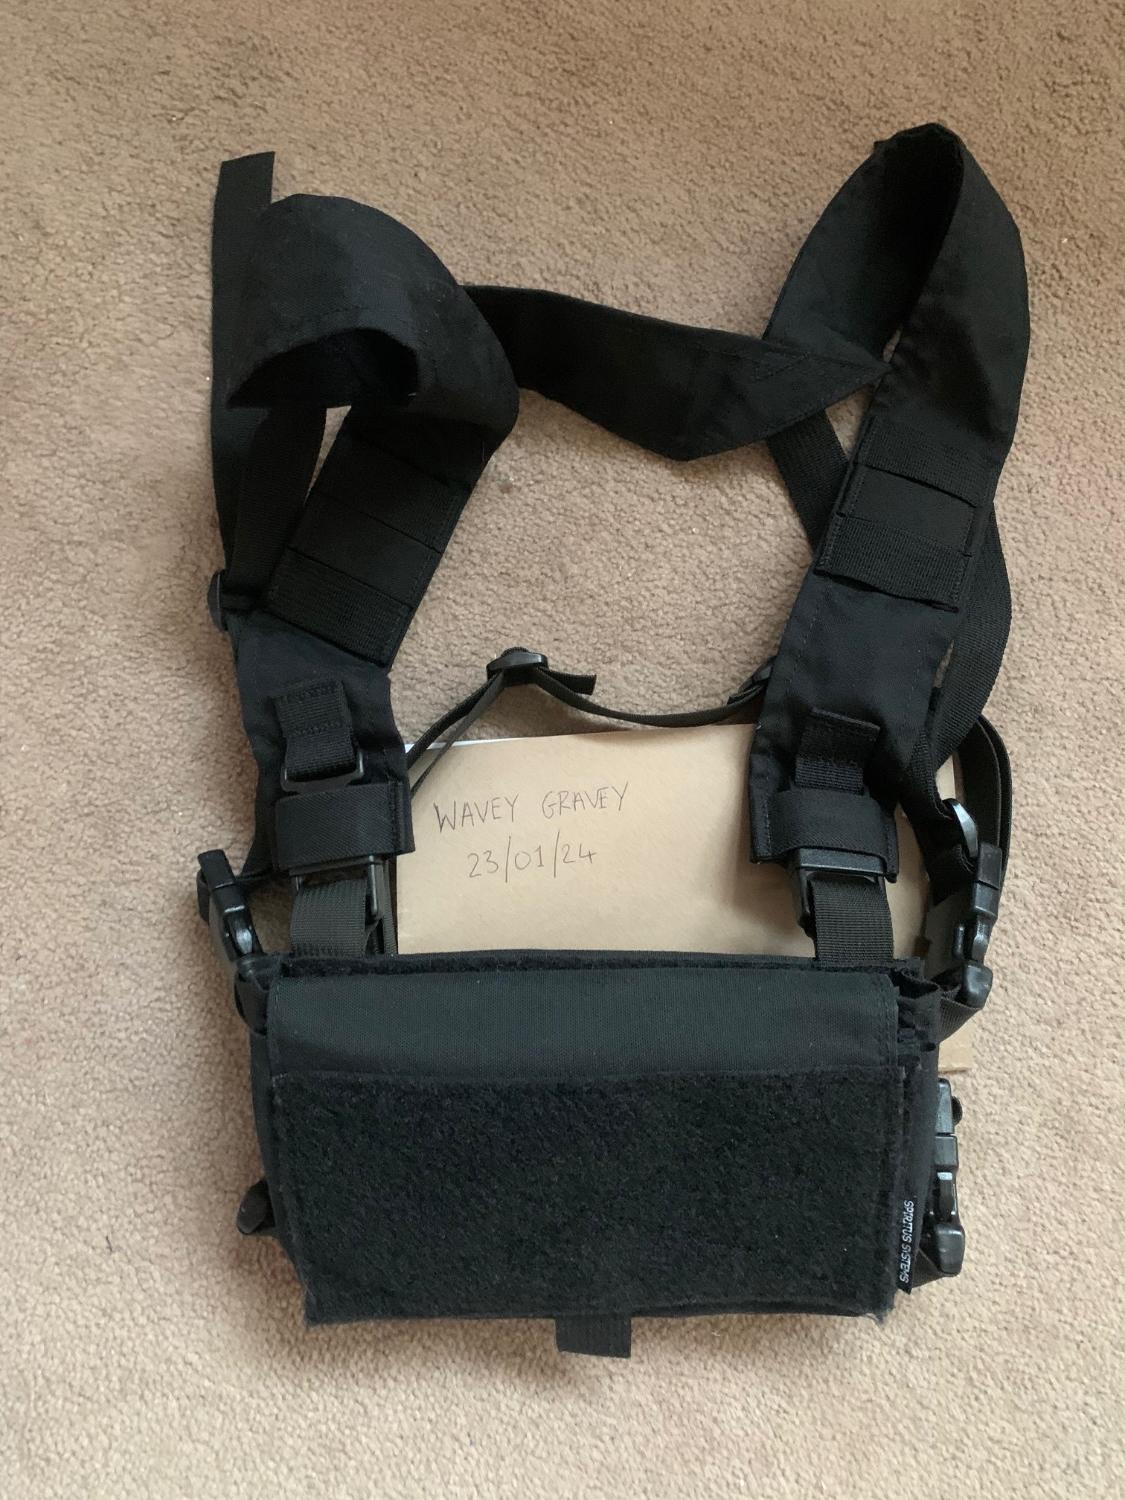 SPIRITUS SYSTEMS MK4 CHEST RIG - Gear - Airsoft Forums UK